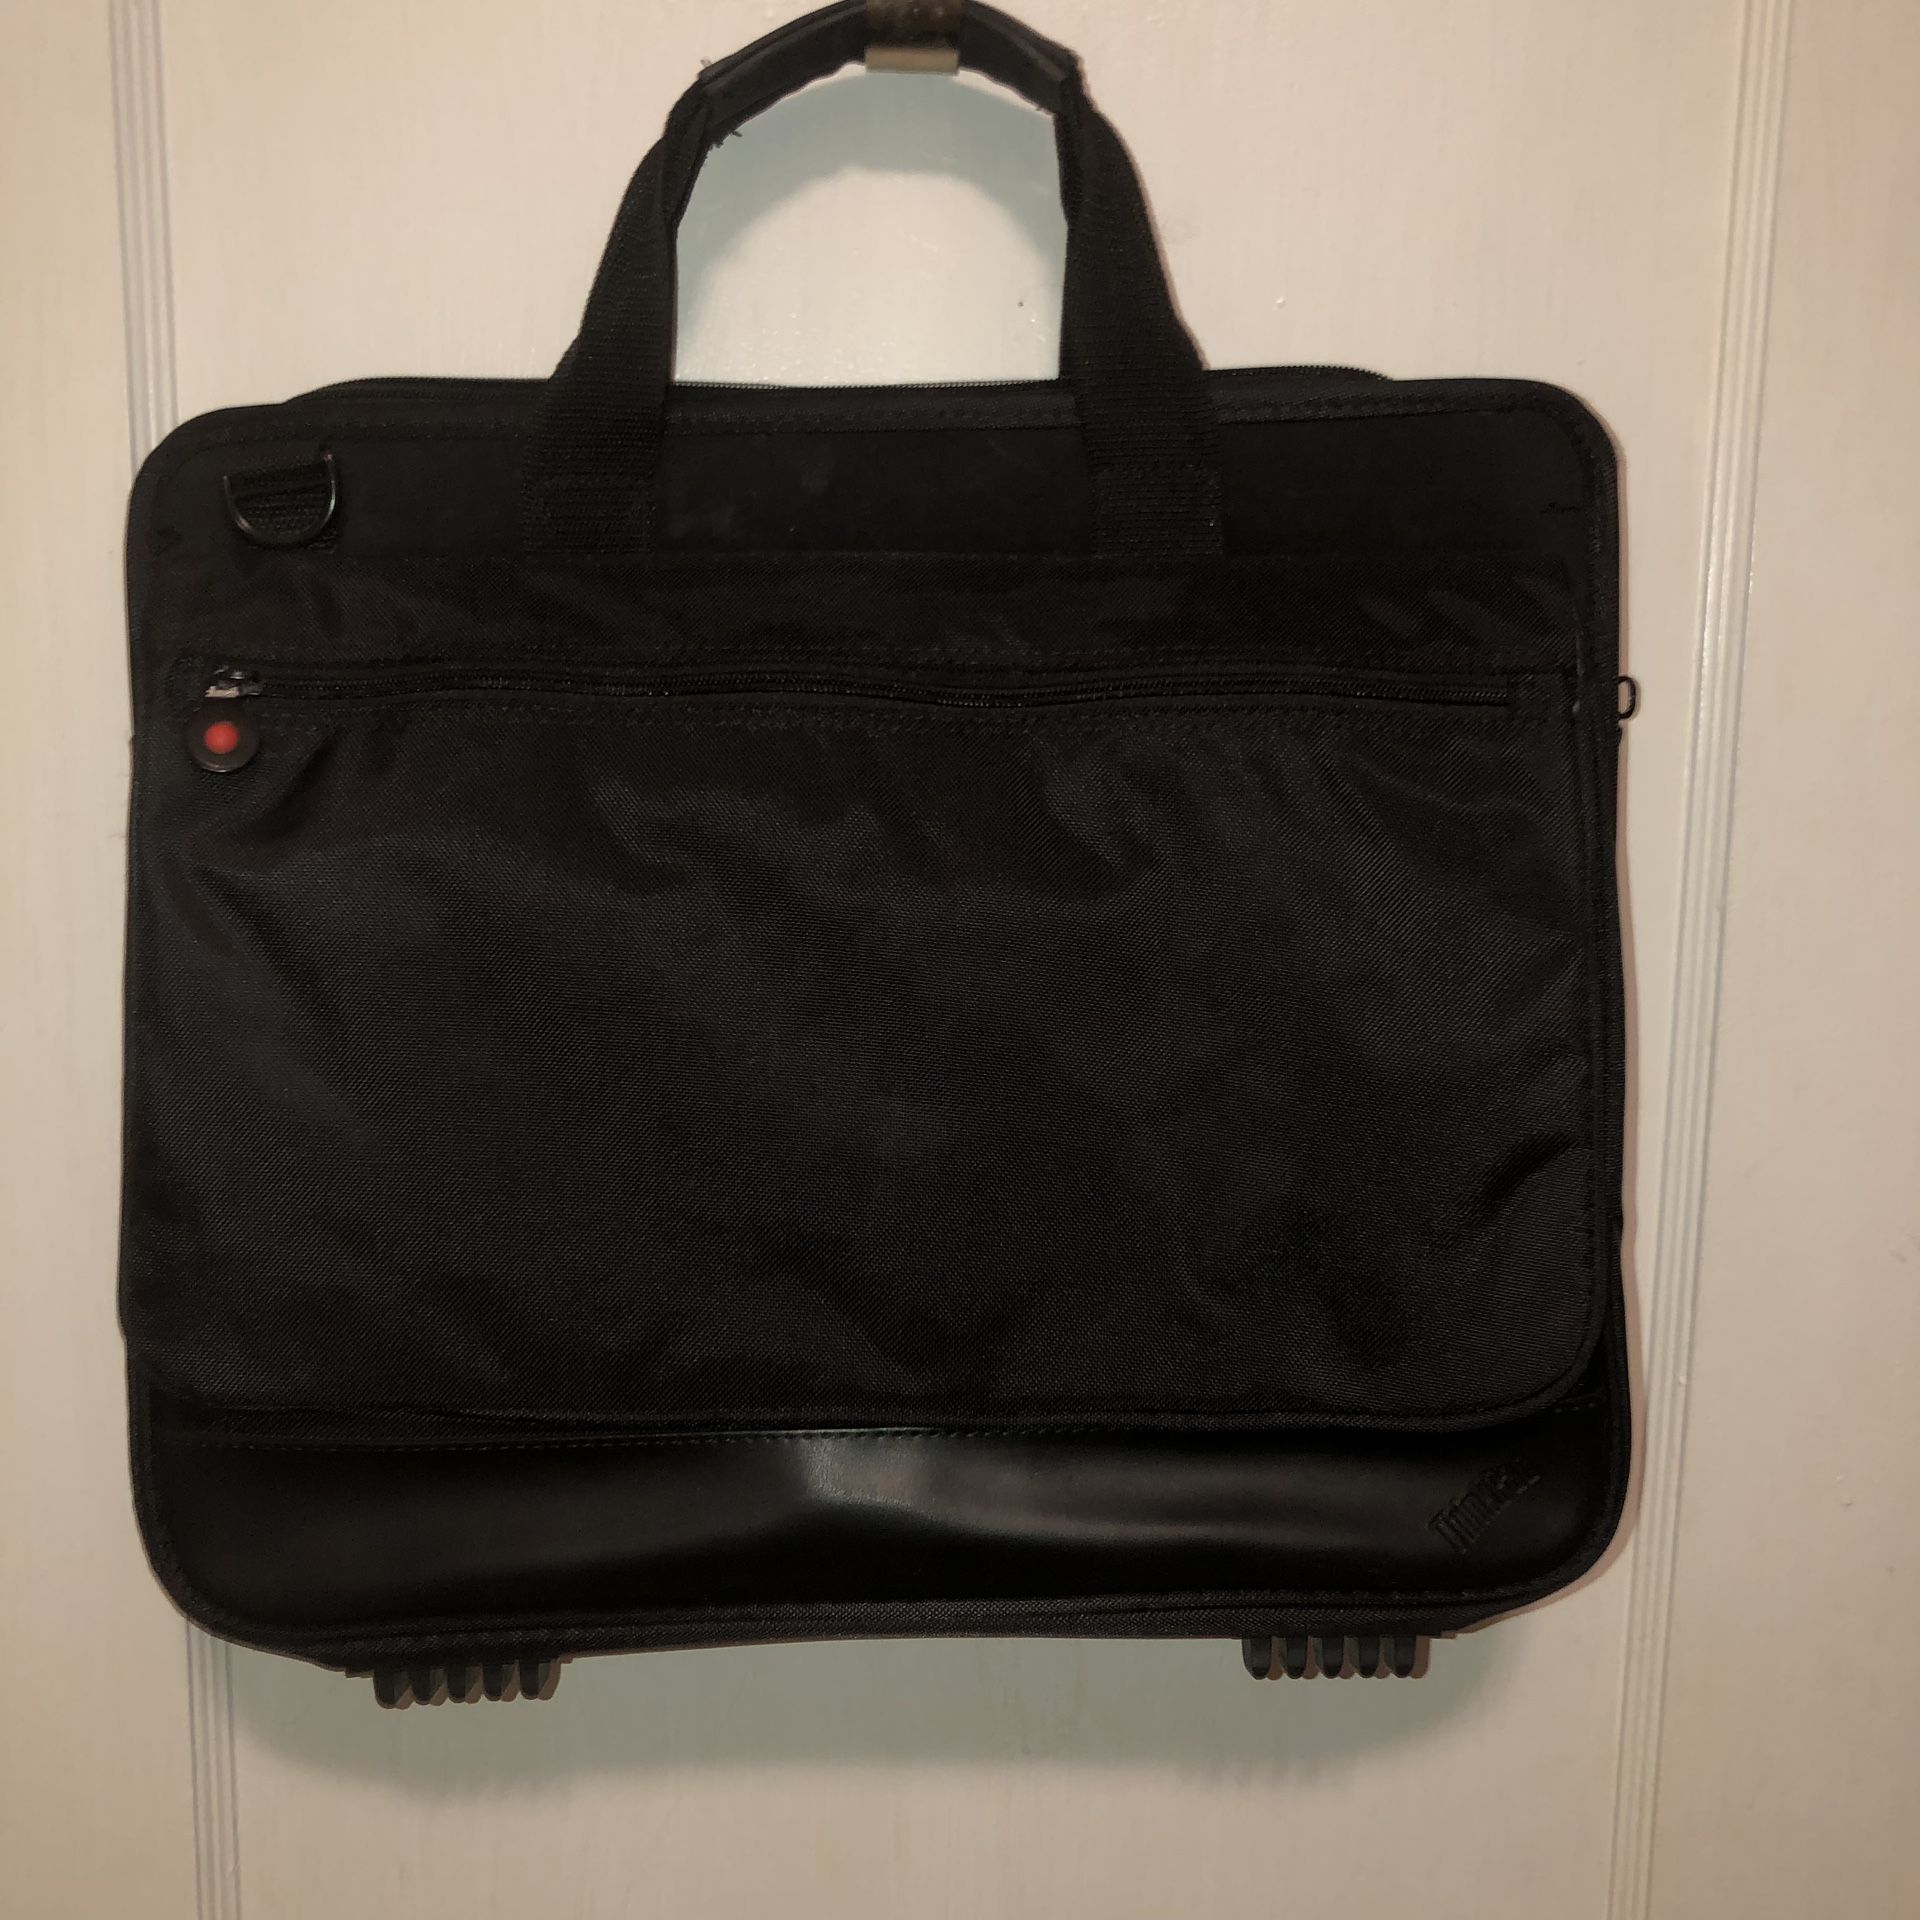 XL ThinkPad black laptop/computer bag/case with a padded section to protect your computer and lots of other compartments and velcro and zipper openin